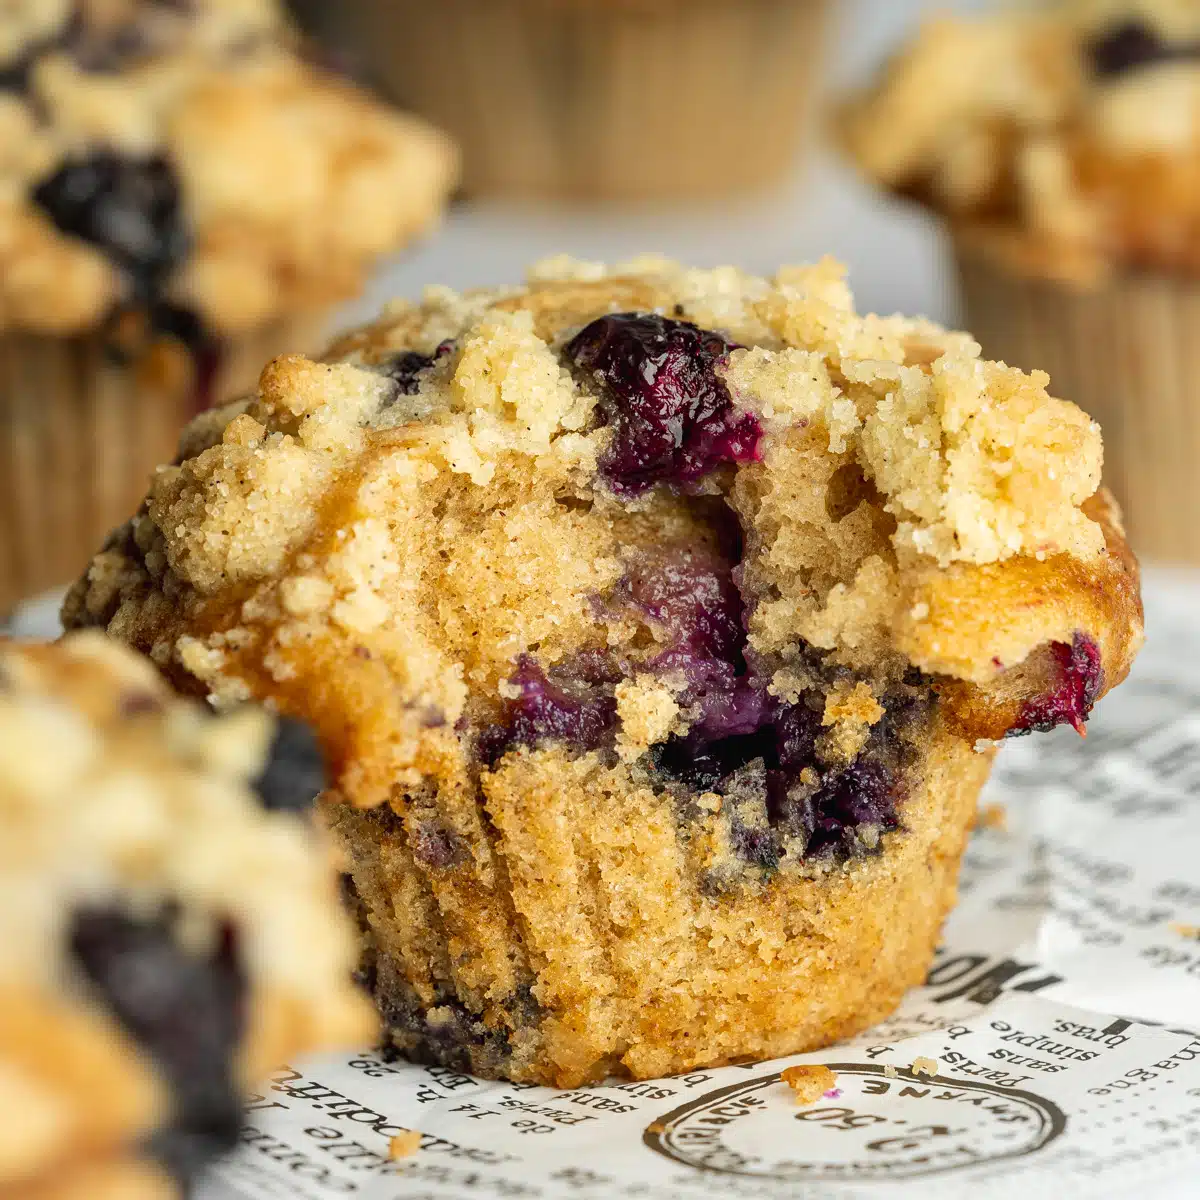 a bakery-style blueberry muffin with streusel topping and a bite taken out of it.